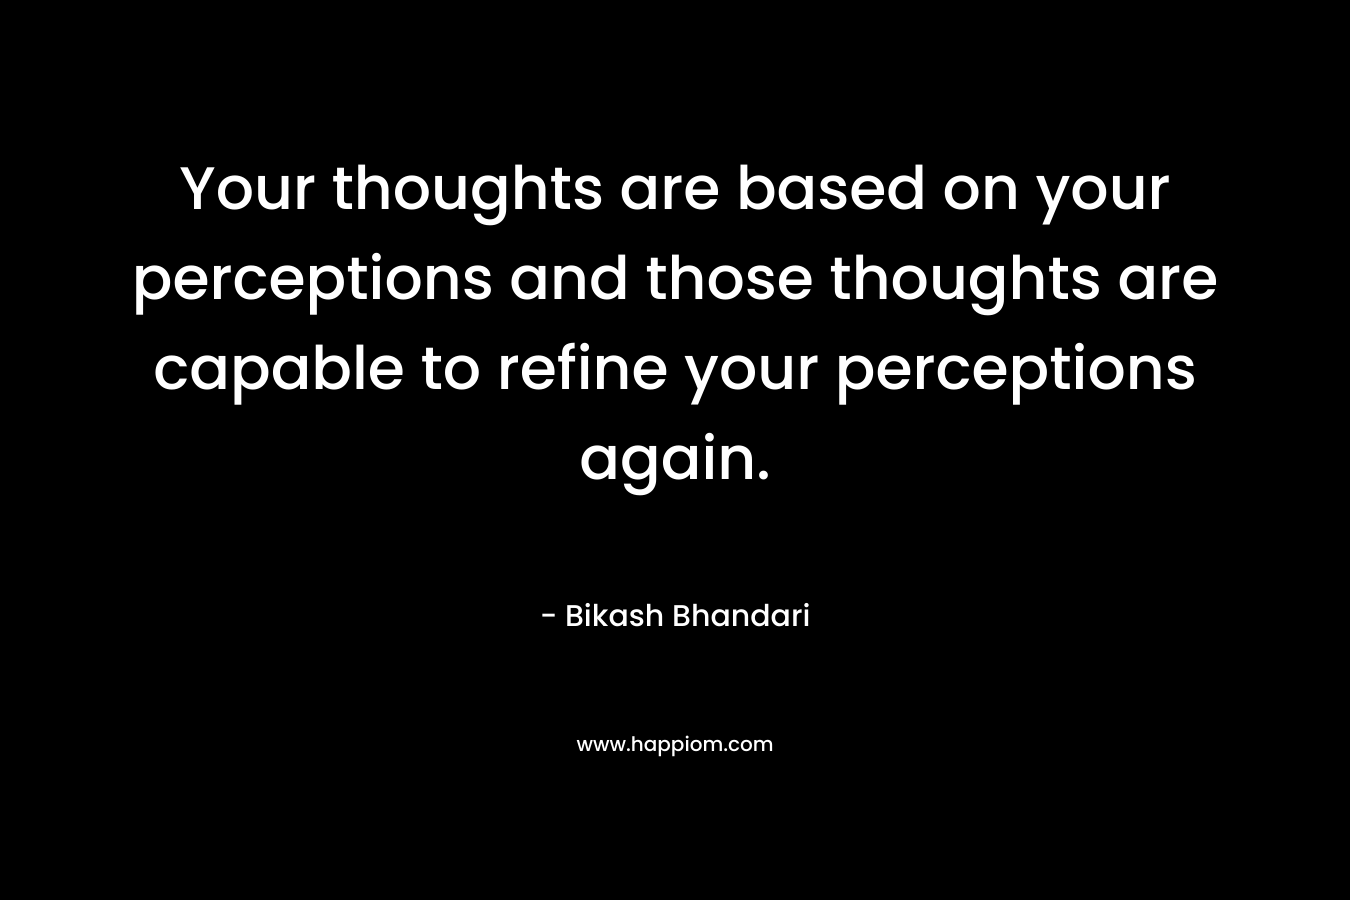 Your thoughts are based on your perceptions and those thoughts are capable to refine your perceptions again. – Bikash Bhandari